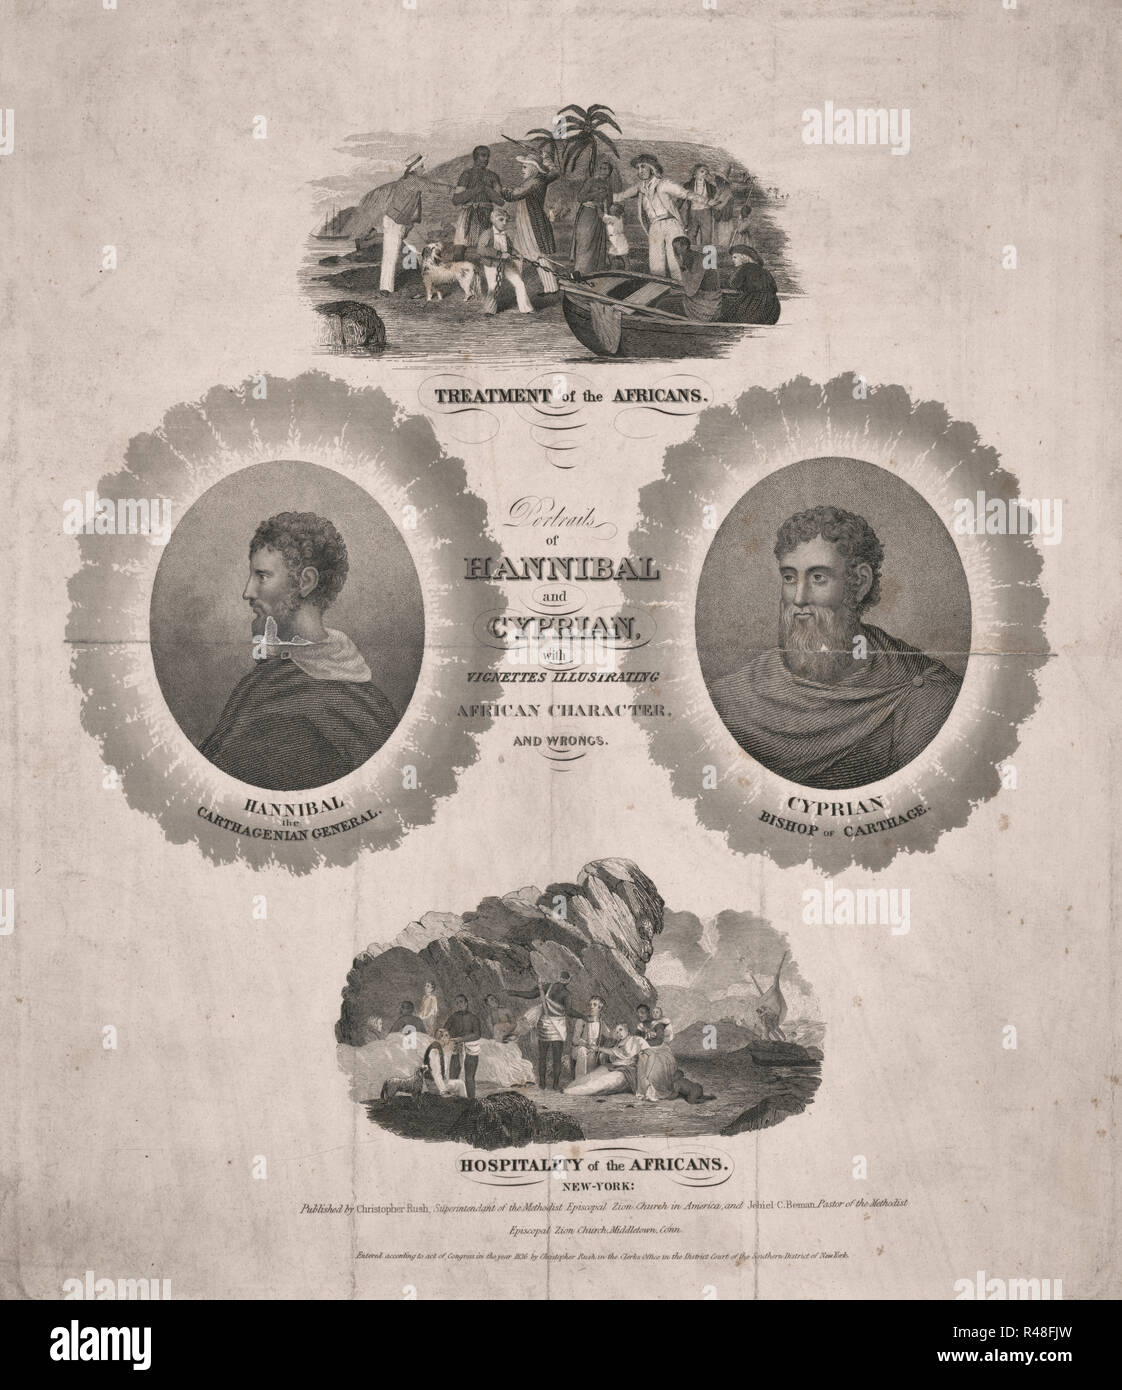 Portraits of Hannibal and Cyprian, with vignettes illustrating African character and wrongs - An abolitionist print, asserting the nobility of the African peoples and deploring their inhumane treatment under the slave trade. There are two vignettes: 'Treatment of the Africans' (top) showing African natives being beaten and abducted by slave traders, and 'Hospitality of the Africans' (bottom) showing shipwrecked whites saved and nursed by African natives. Appearing in aureoles of light are bust portraits of two outstanding African historical figures, 'Hannibal the Carthagenian General' and 'Cyp Stock Photo